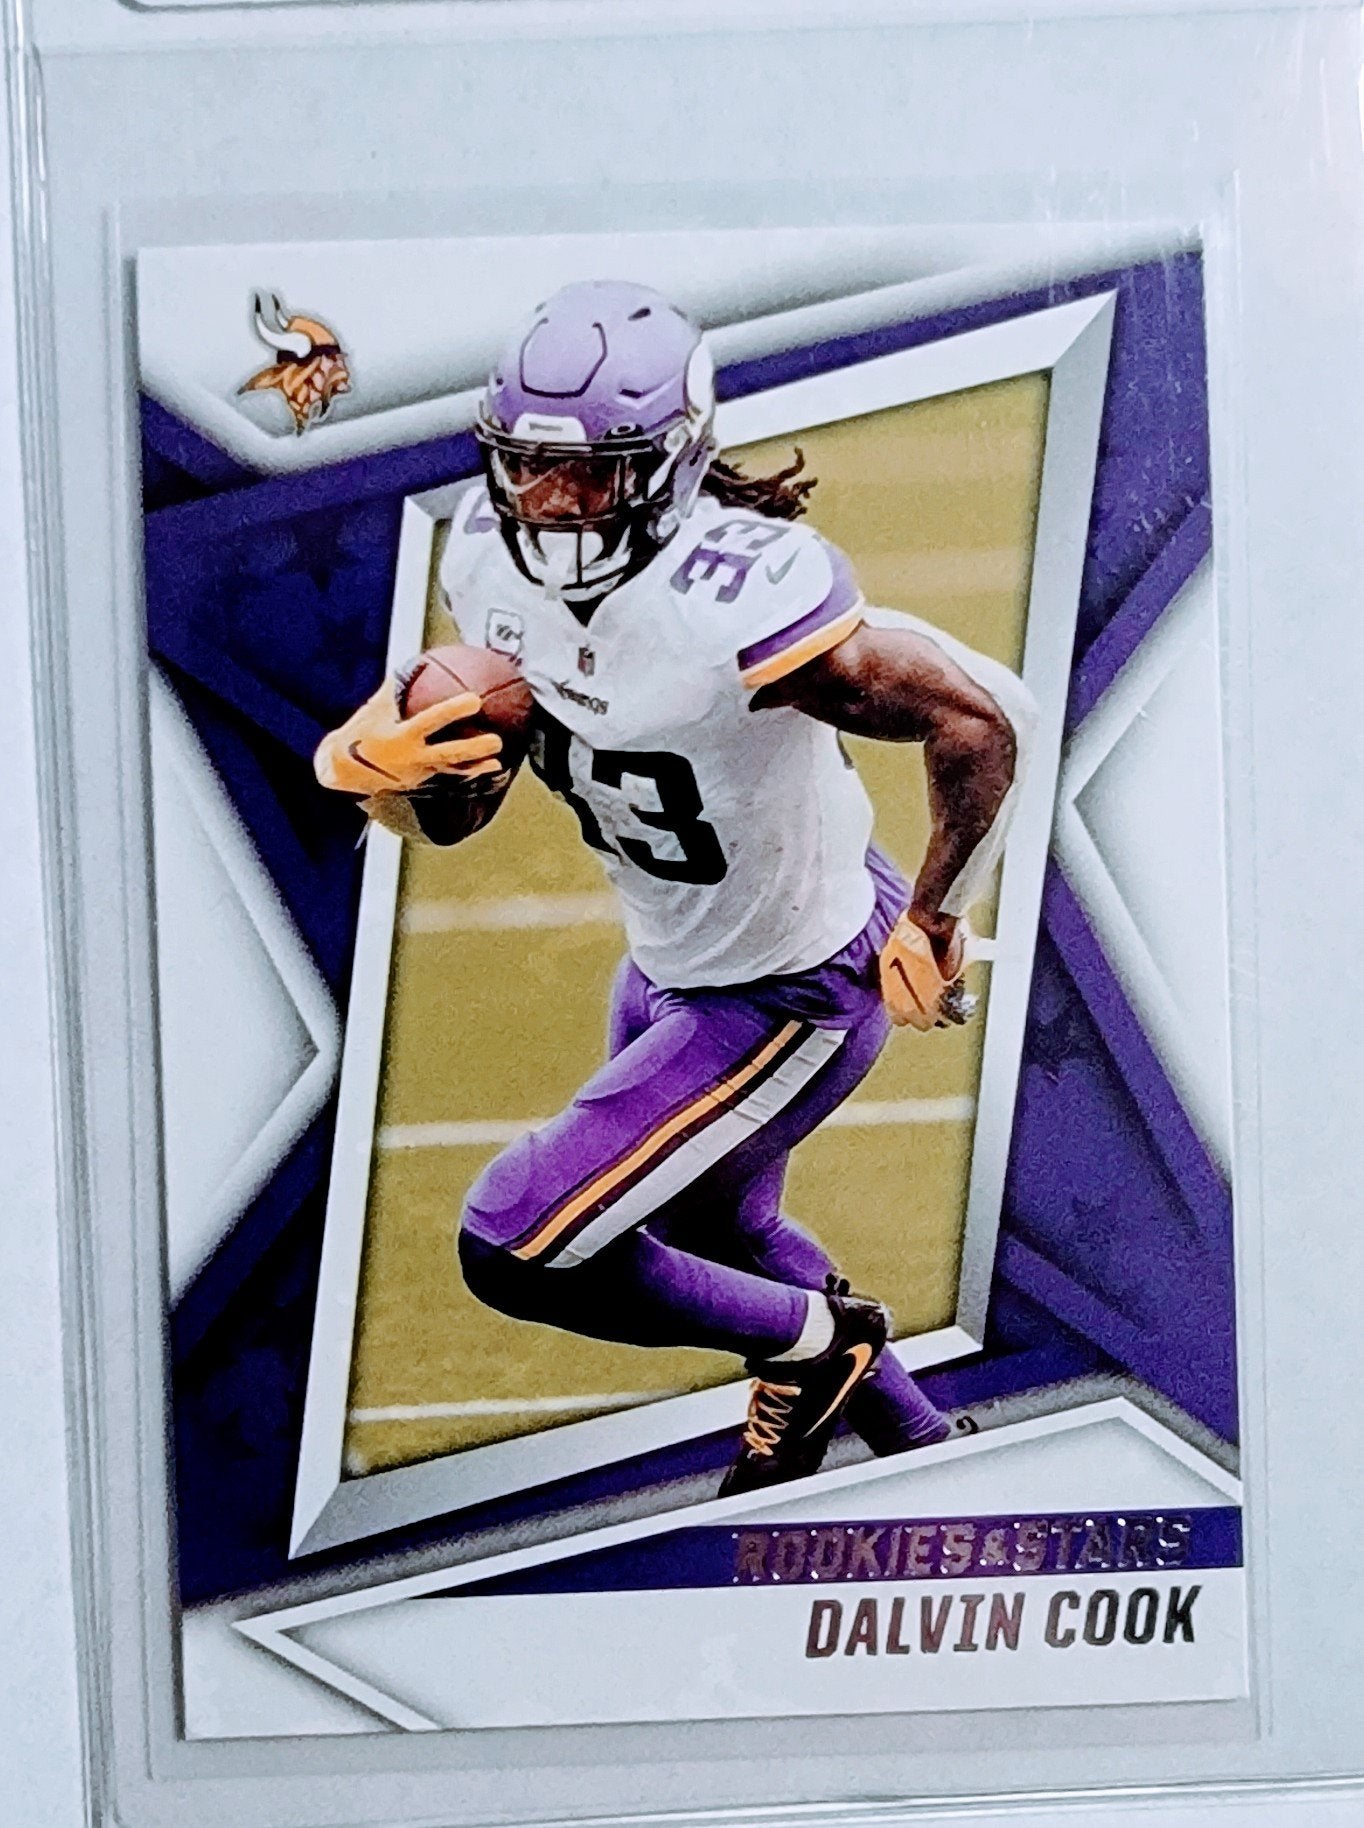 2021 Panini Rookies and Stars Dalvin Cook Football Card AVM1 simple Xclusive Collectibles   